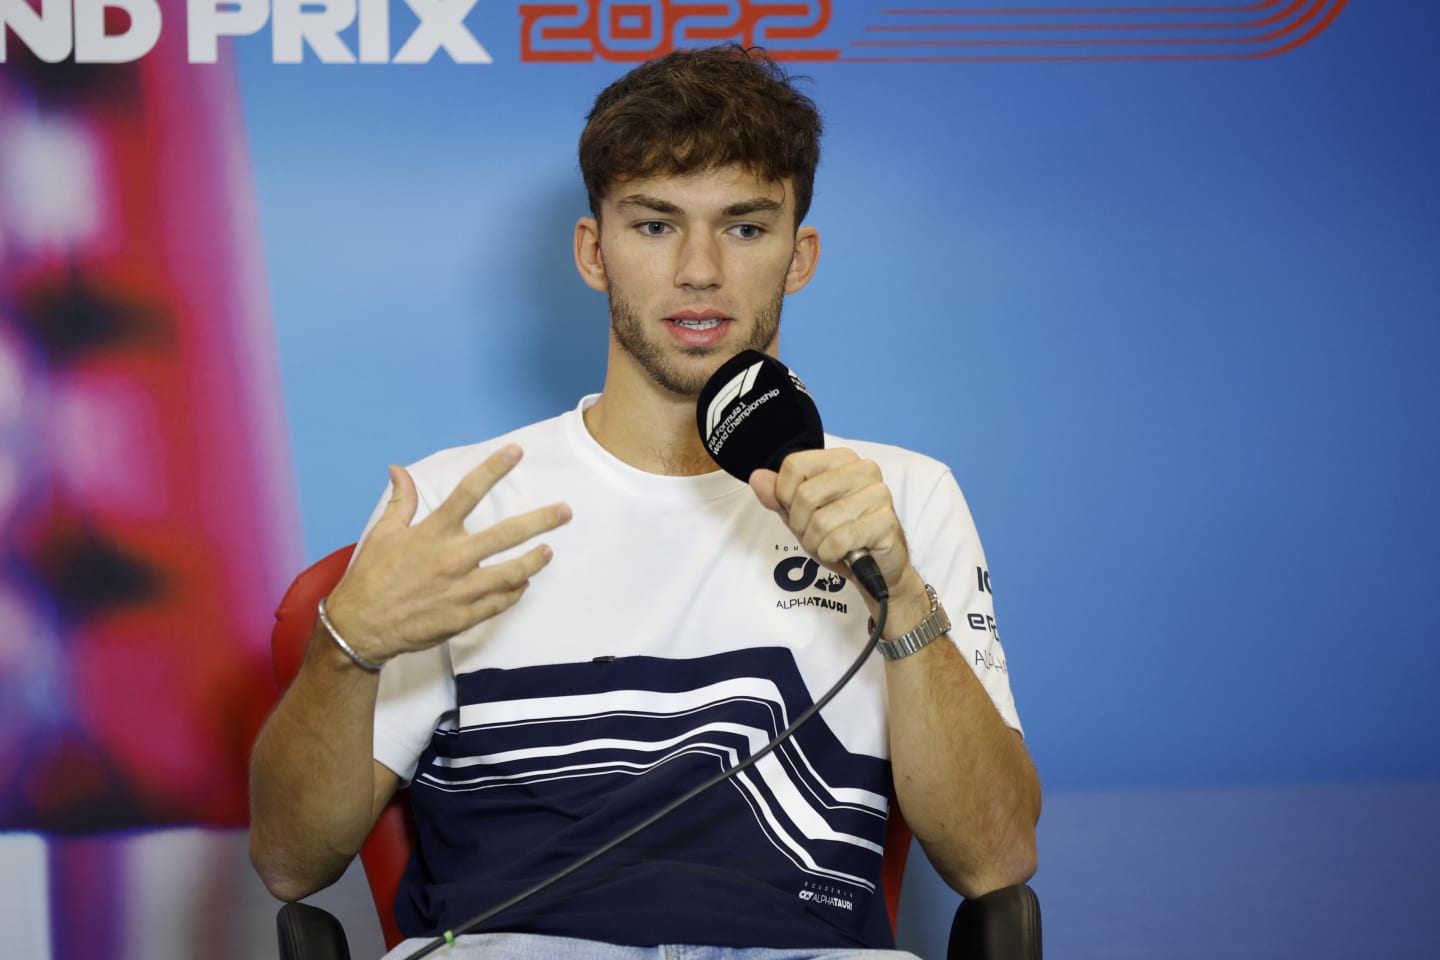 AUSTIN, TEXAS - OCTOBER 20: Pierre Gasly of France and Scuderia AlphaTauri attends the Drivers Press Conference during previews ahead of the F1 Grand Prix of USA at Circuit of The Americas on October 20, 2022 in Austin, Texas. (Photo by Jared C. Tilton/Getty Images)